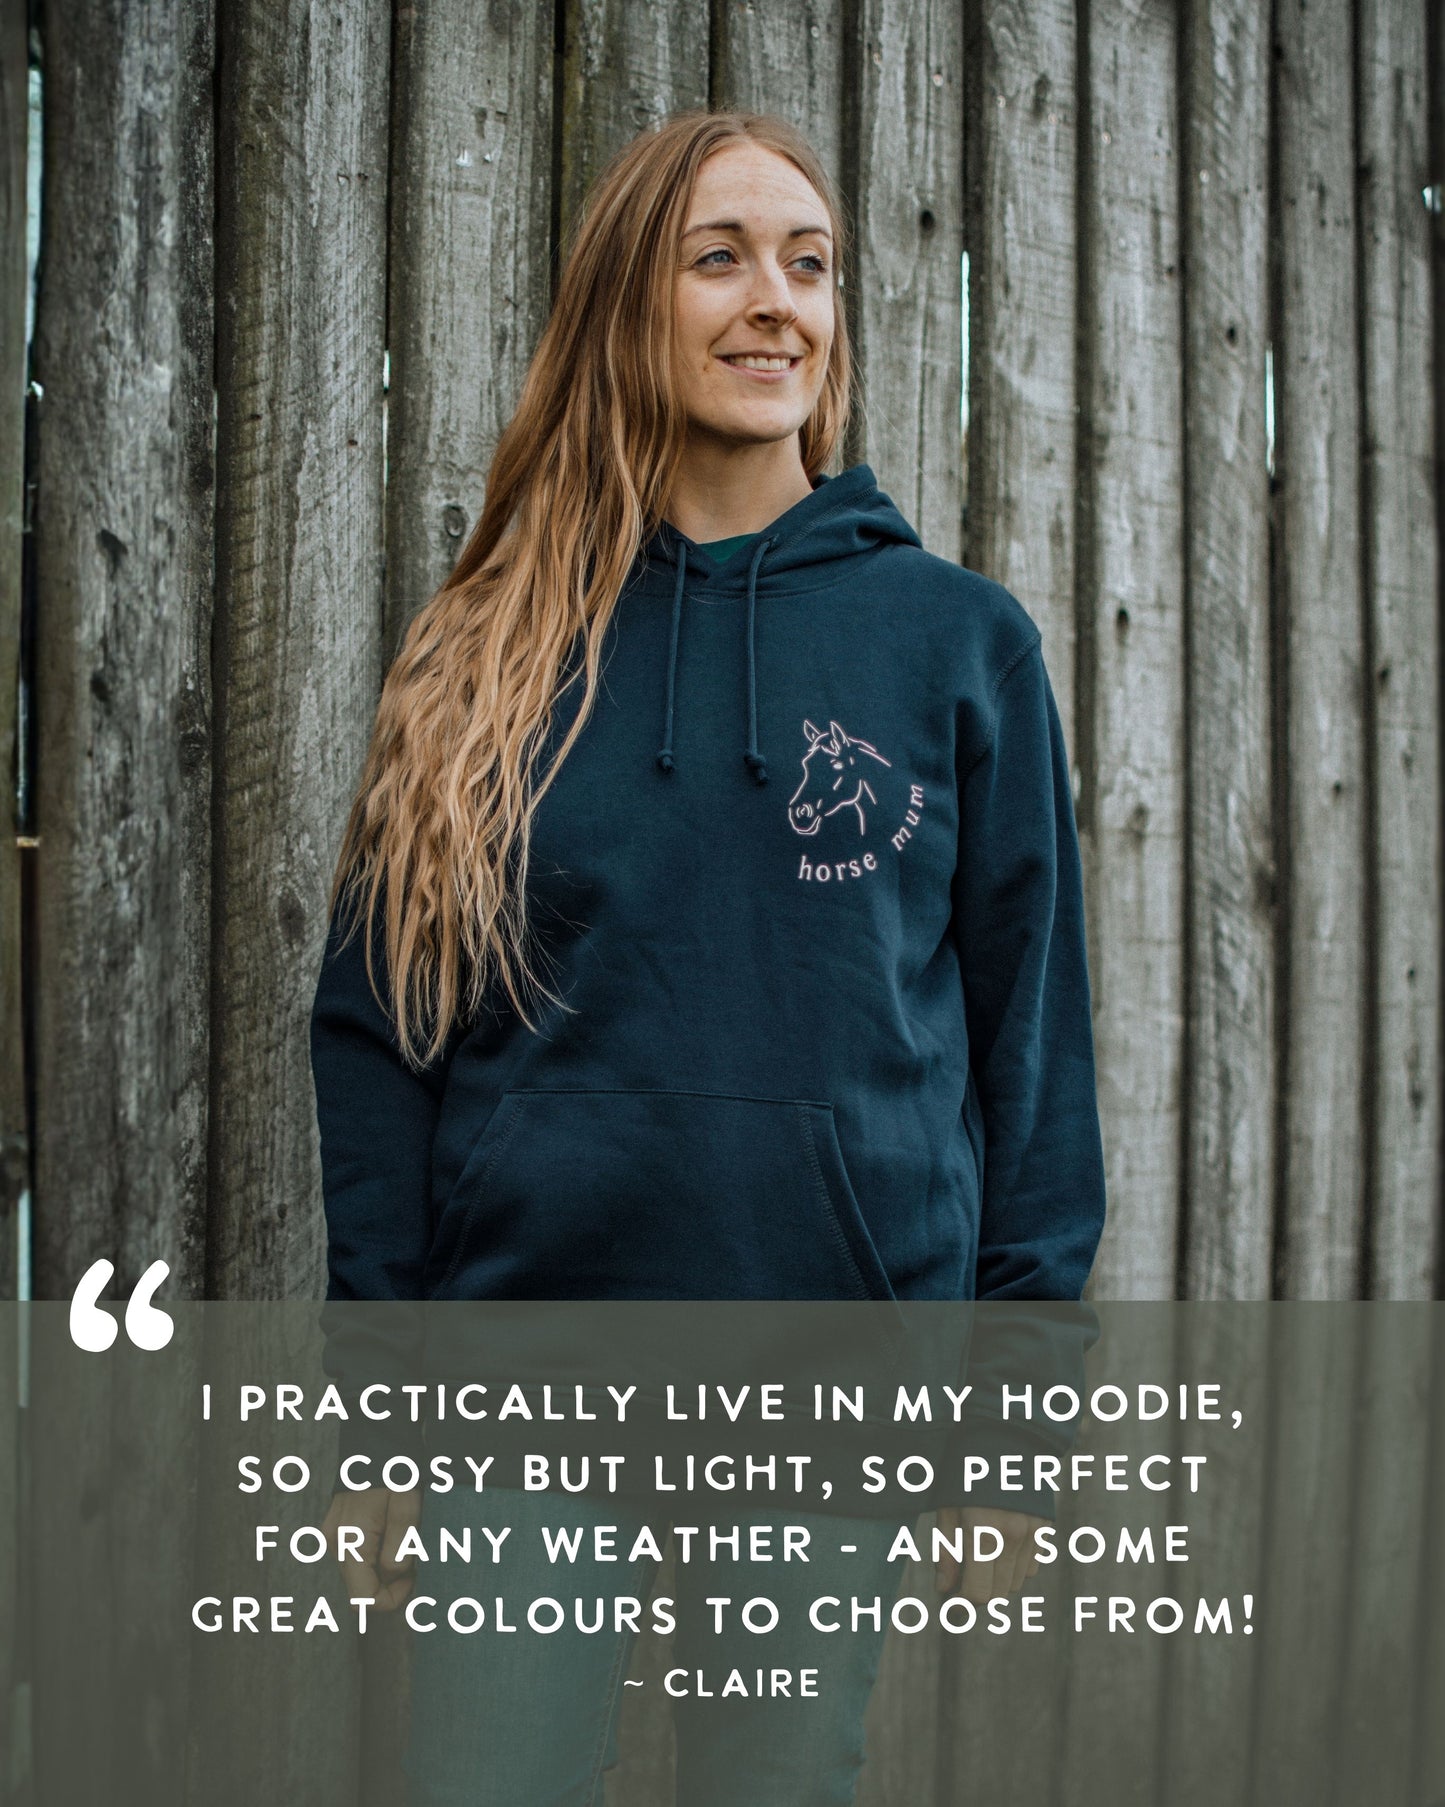 If I Can't Bring My Dog I'm Not Going - Lightweight Hoodie